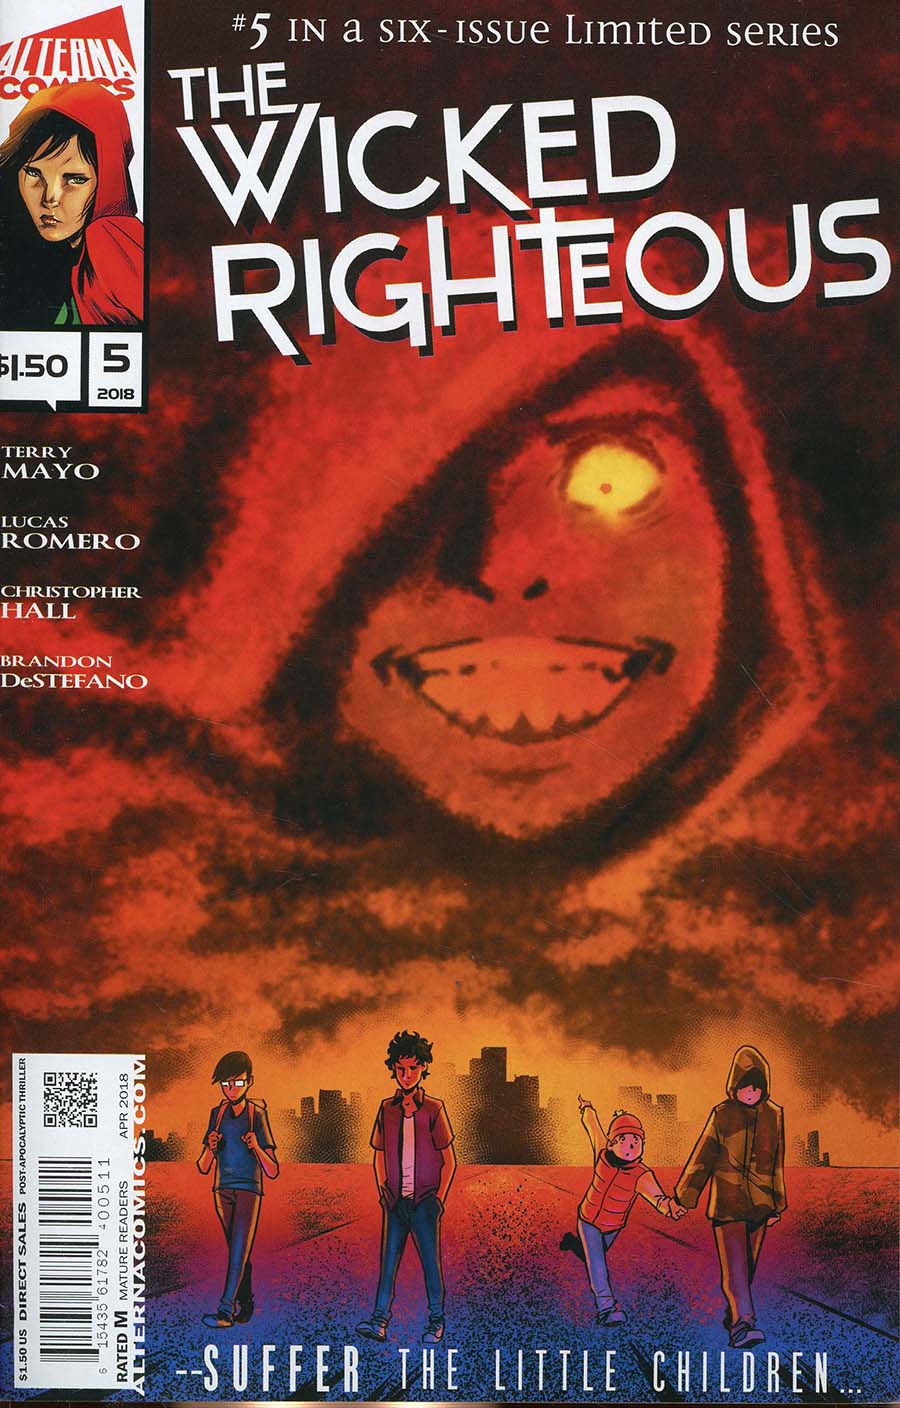 Wicked Righteous #5